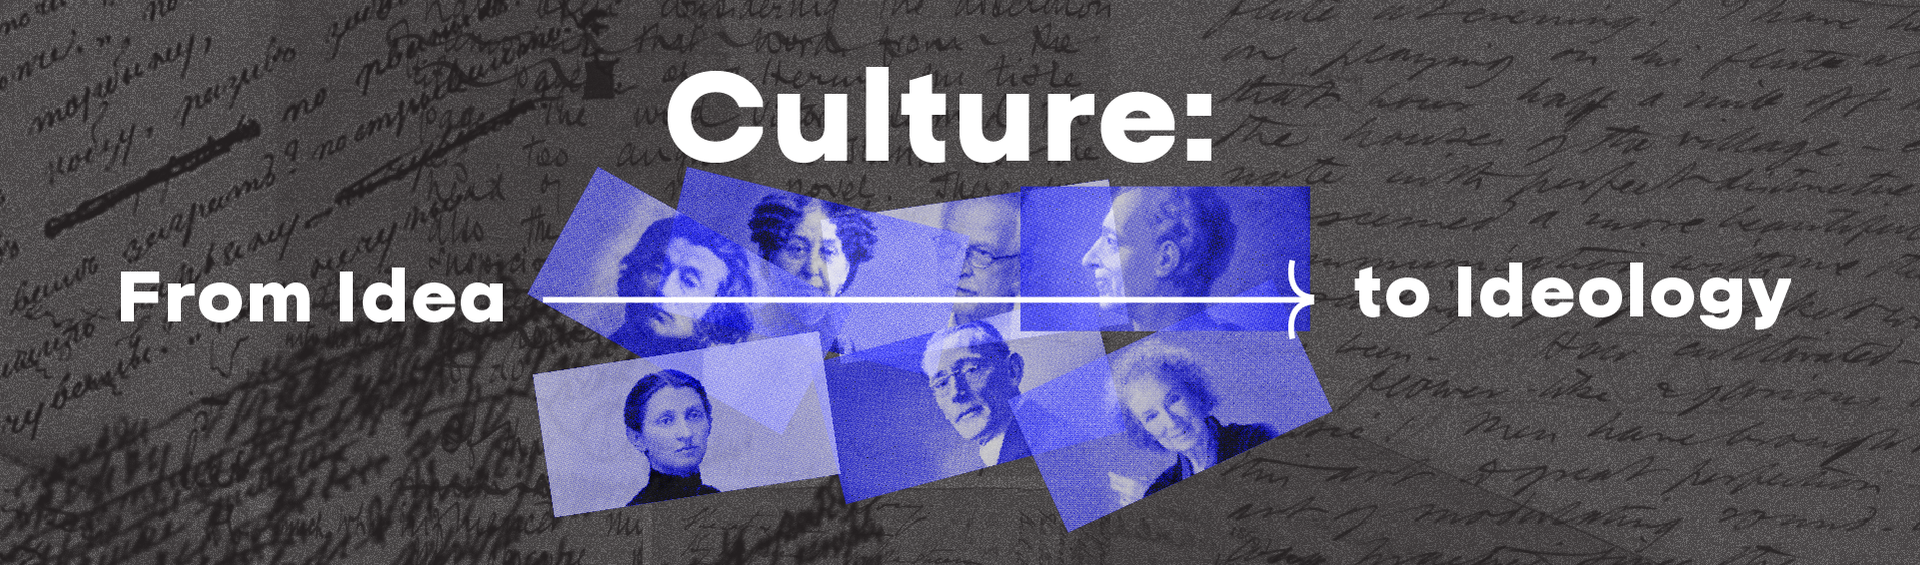 Culture From Idea to Ideology - Project Cover Wide